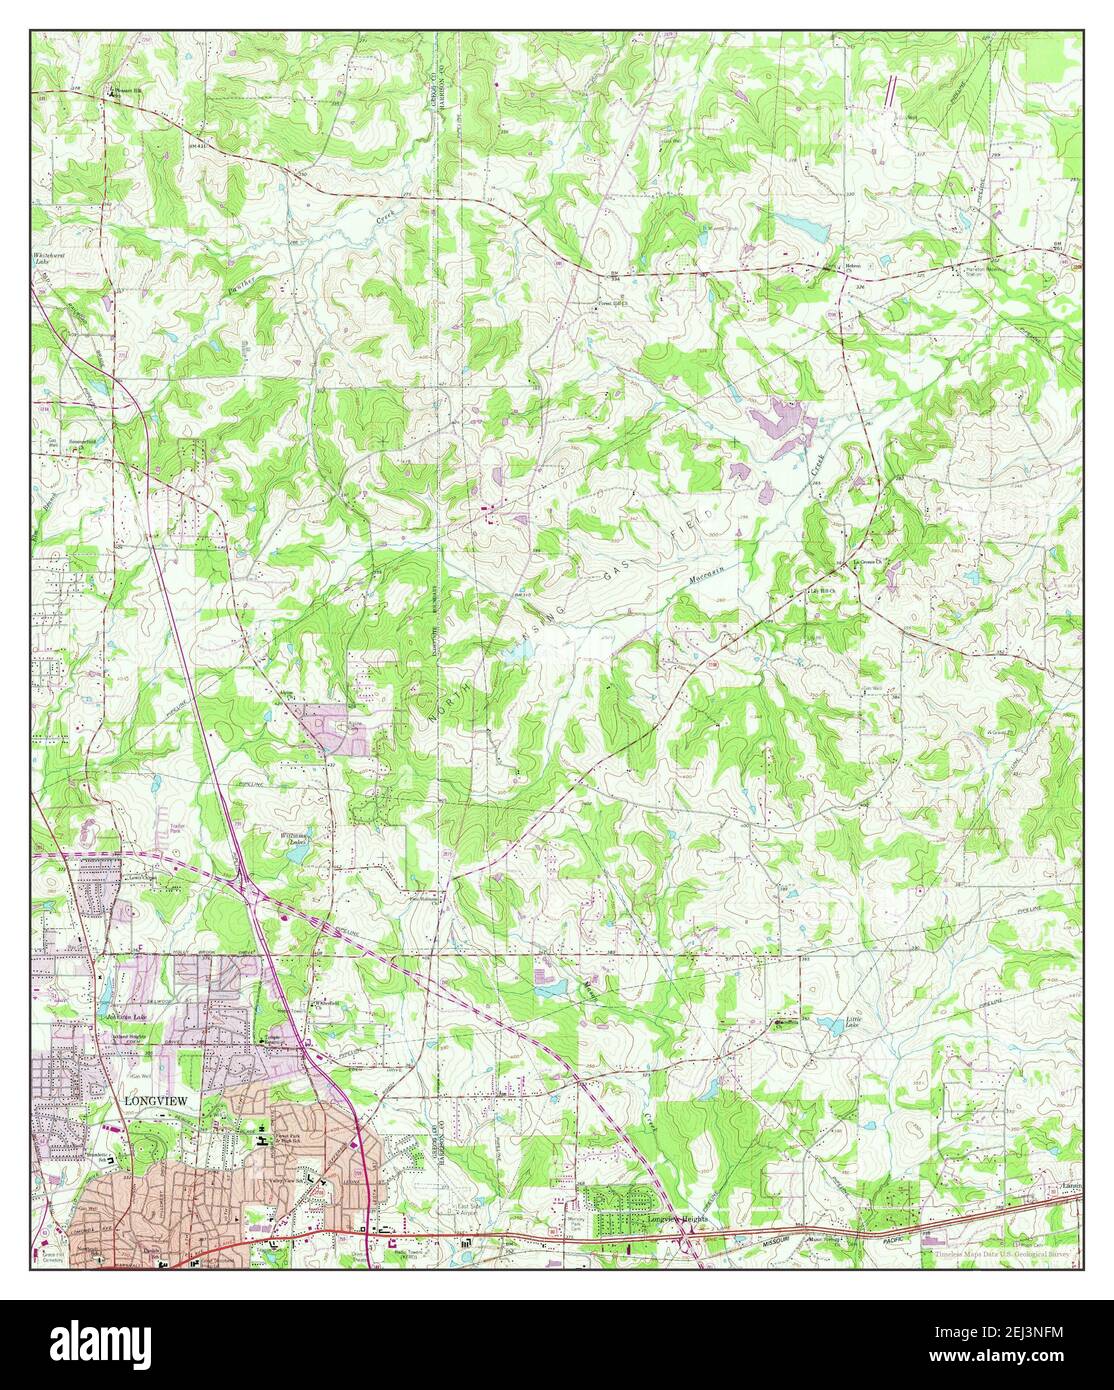 Longview Heights Texas Map 1962 124000 United States Of America By Timeless Maps Data Us Geological Survey 2EJ3NFM 